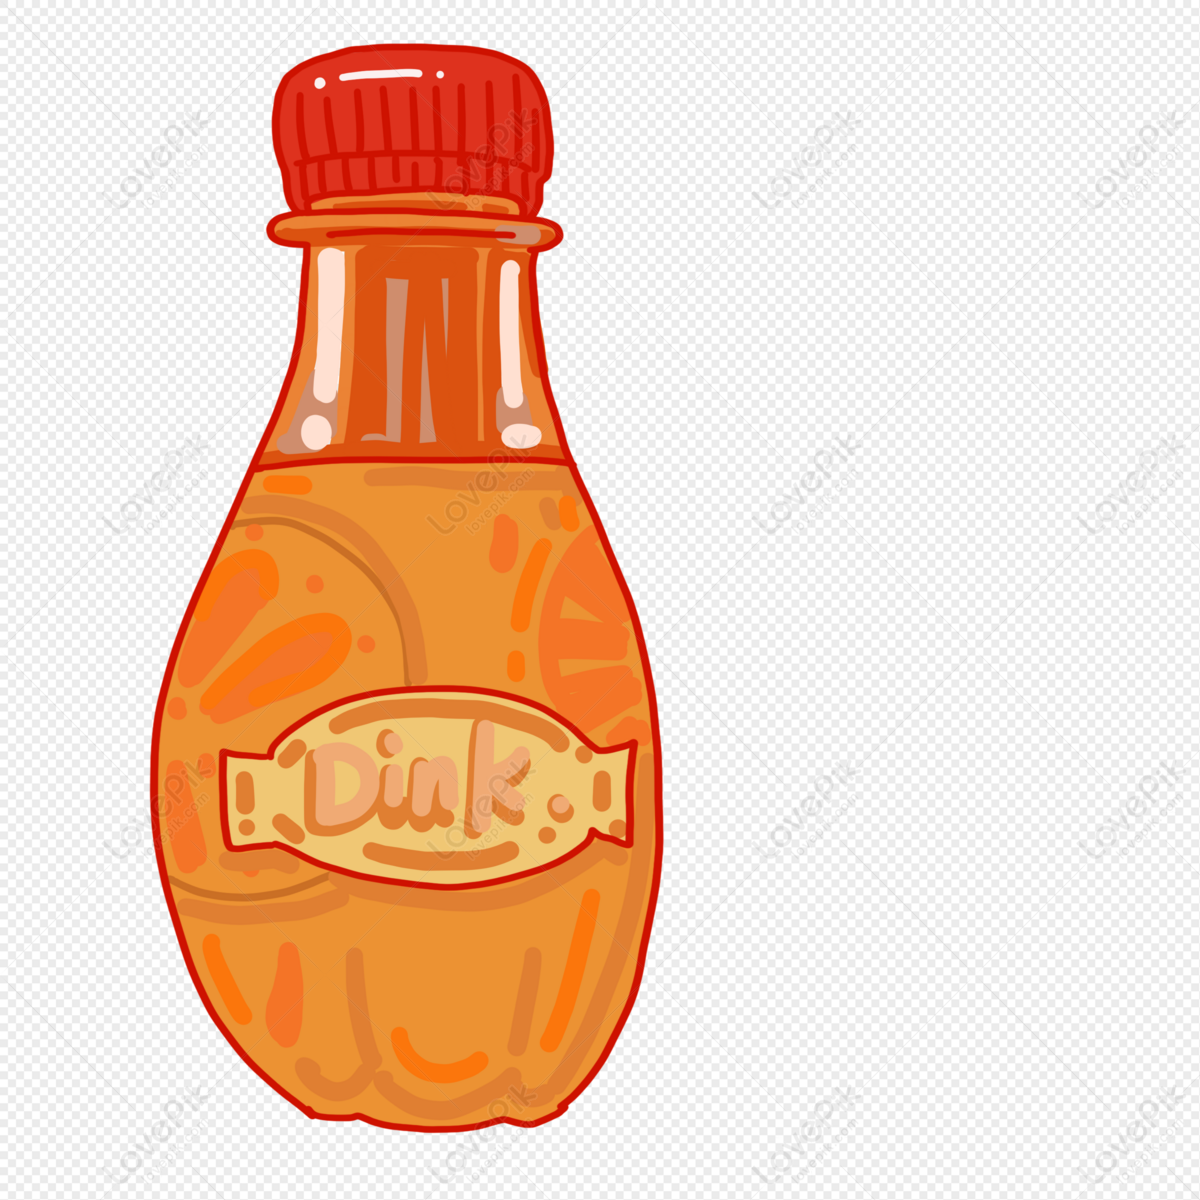 Drink PNG Transparent Image And Clipart Image For Free Download ...